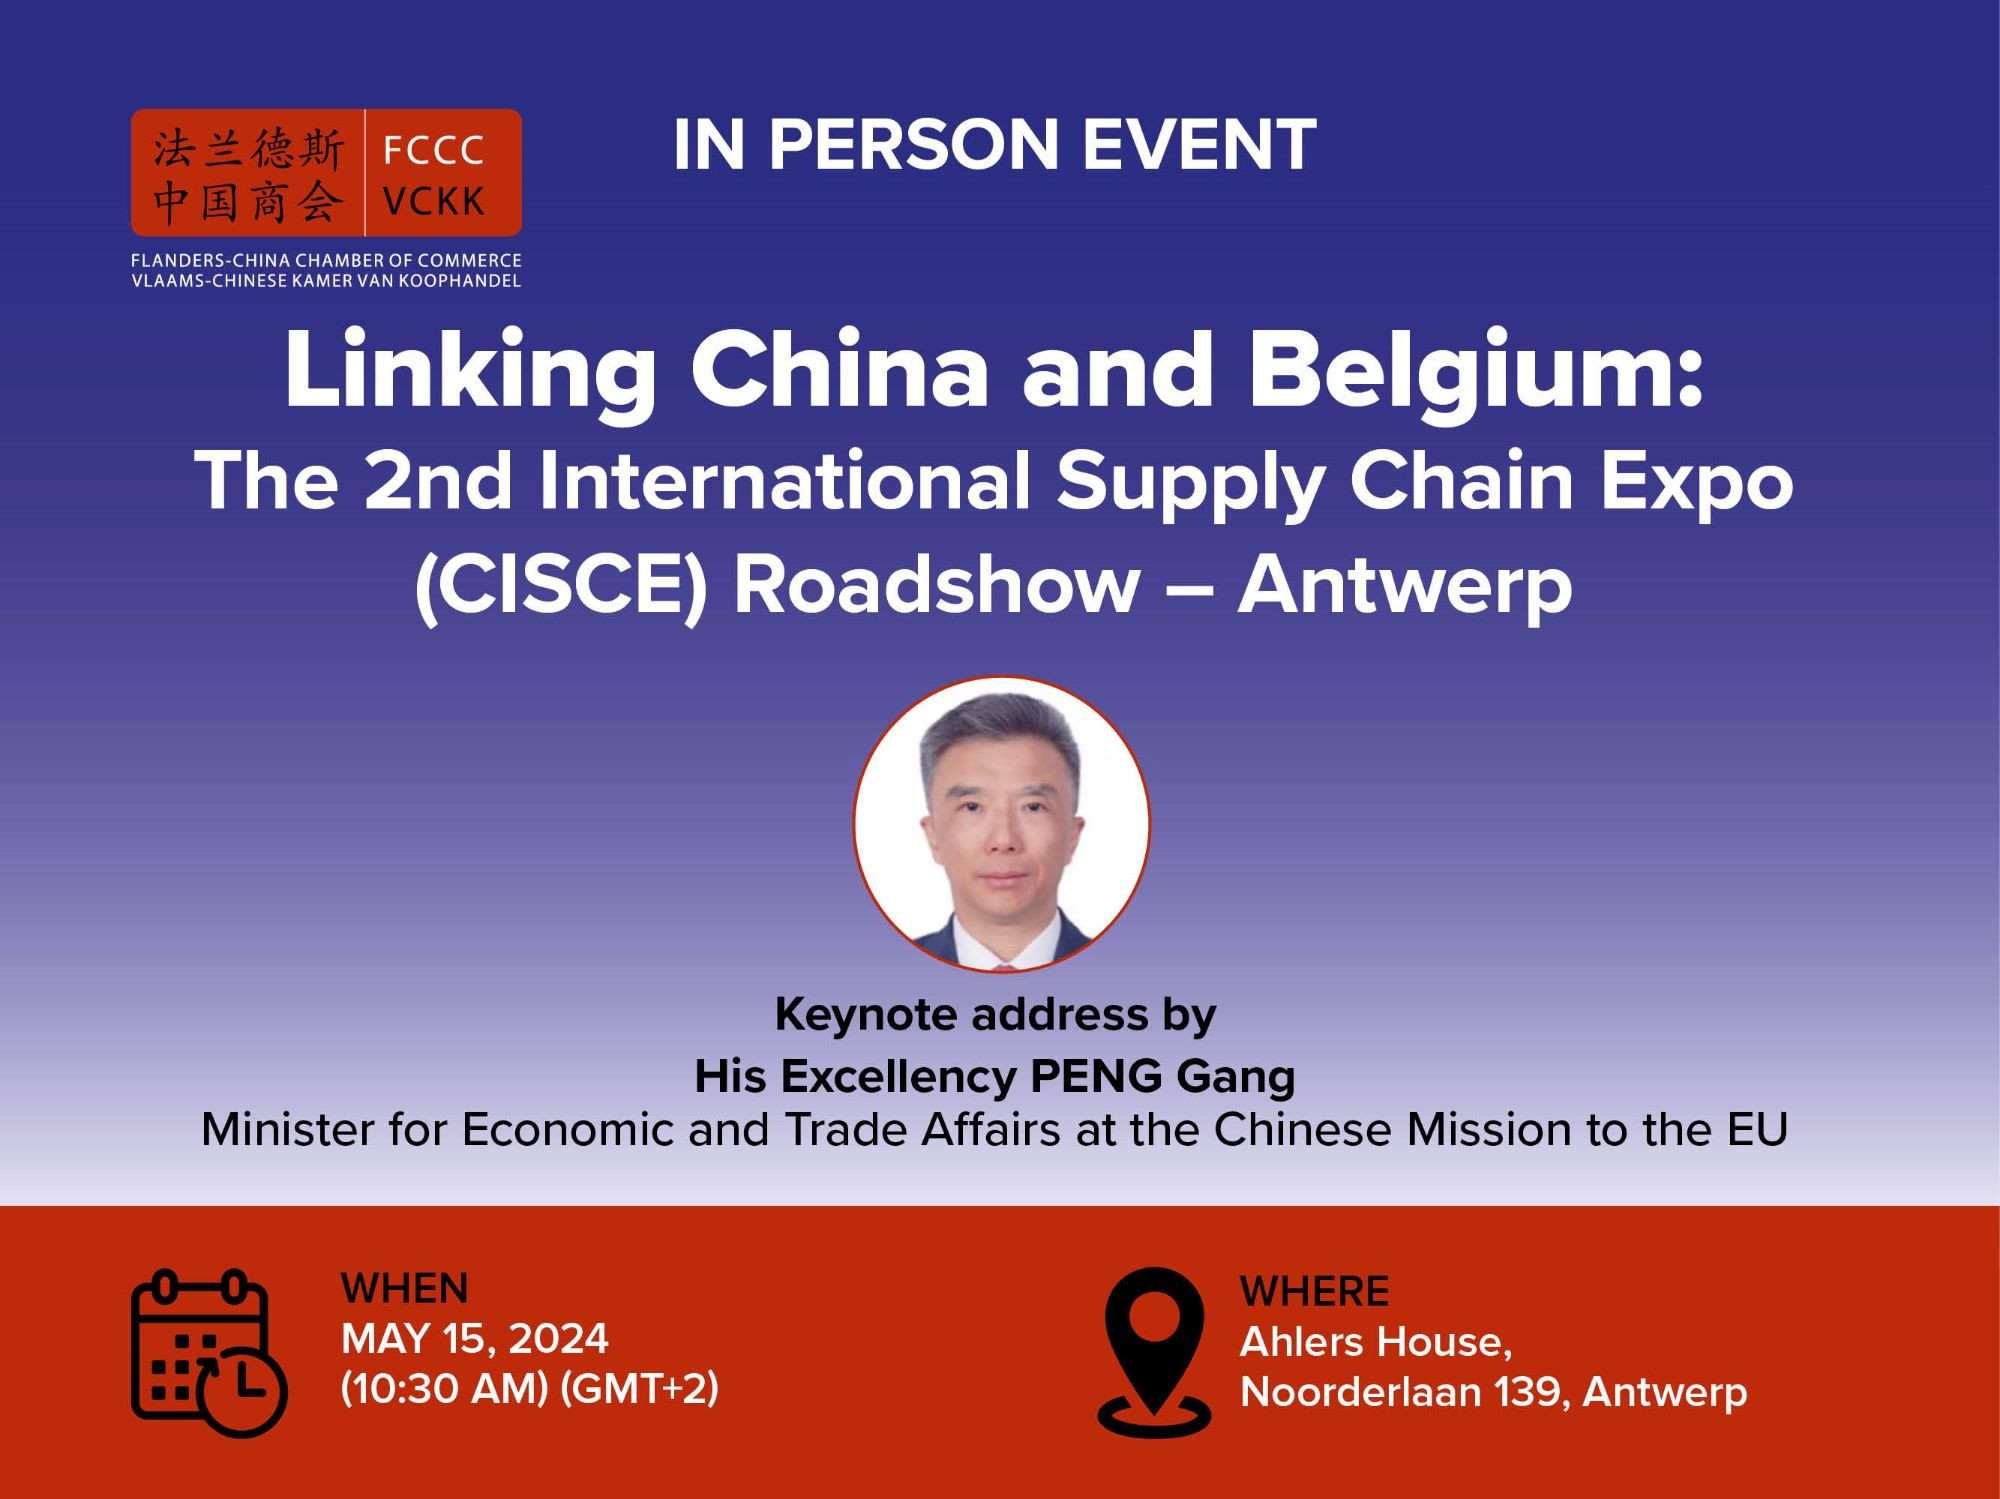 In-person event: Linking China and Belgium: The 2nd International Supply Chain Expo (CISCE) Roadshow - Antwerp